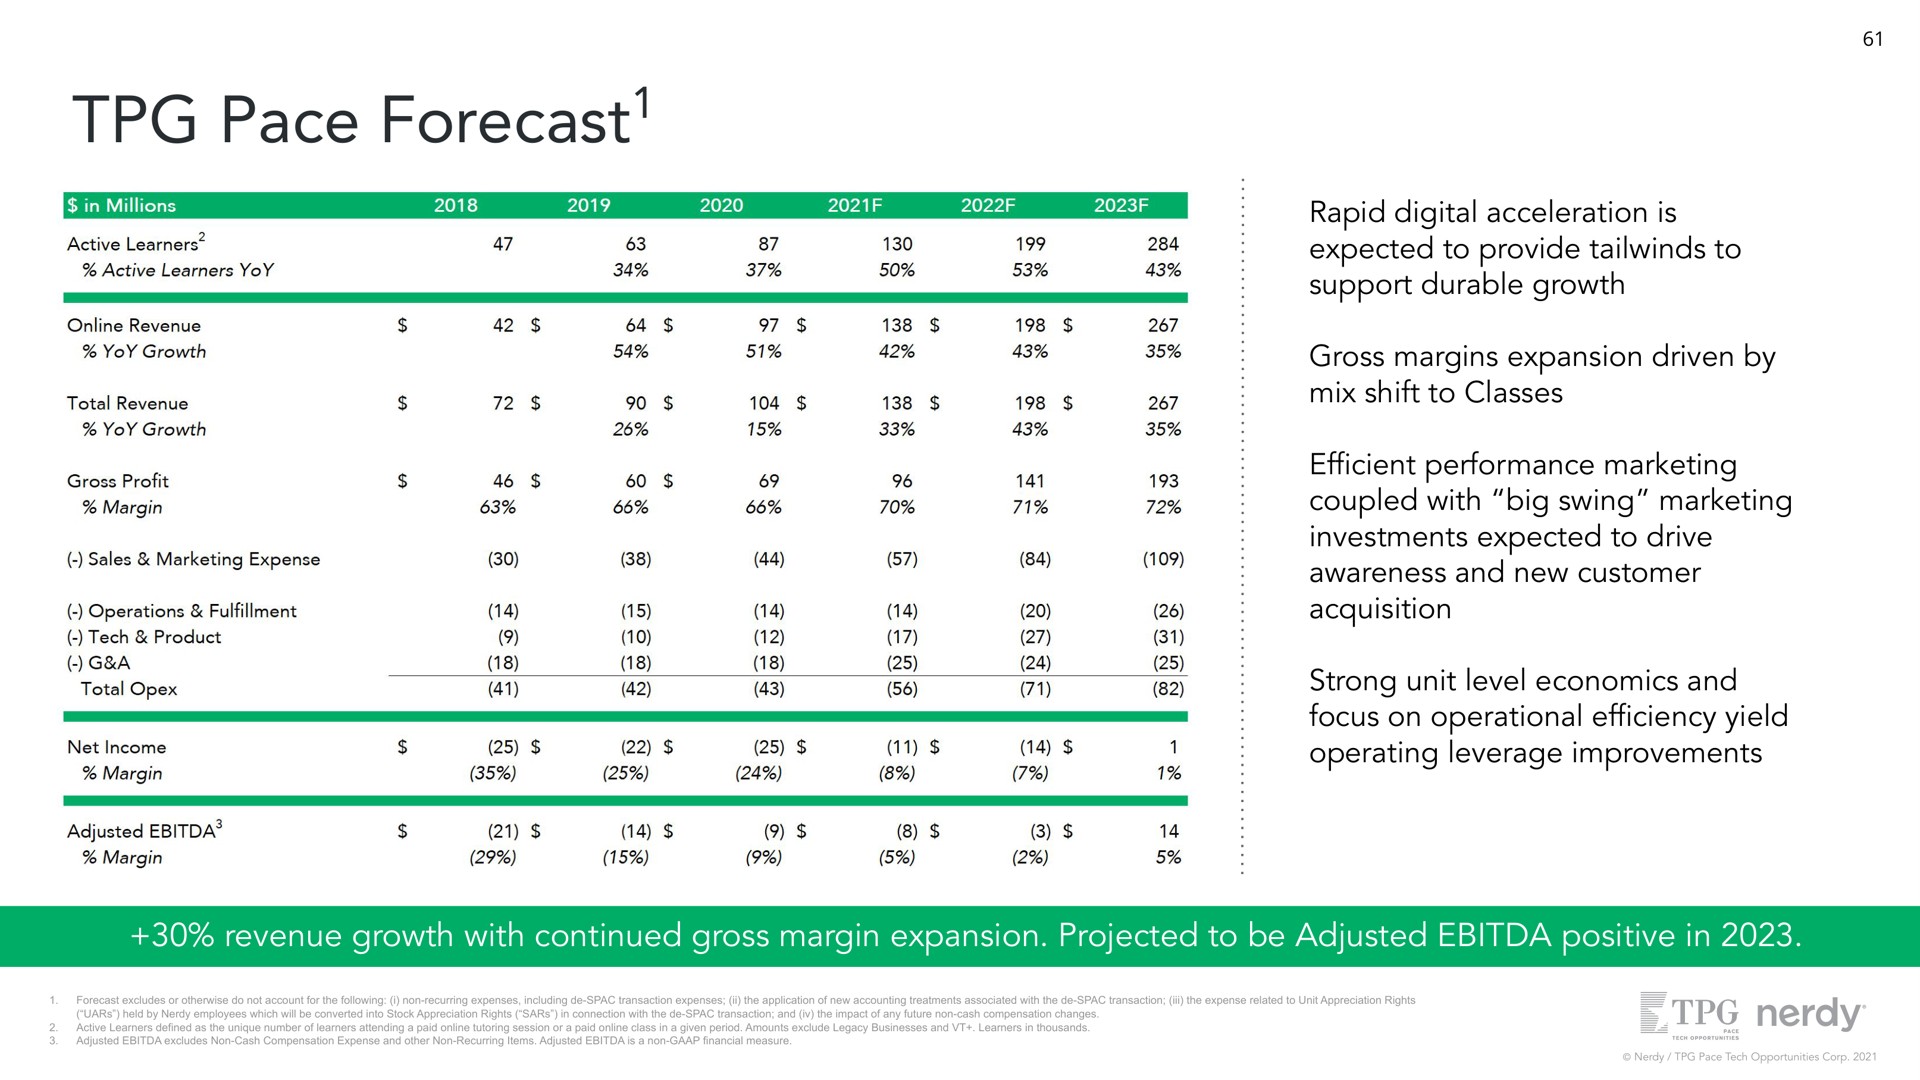 pace forecast rapid digital acceleration is expected to provide to support durable growth gross margins expansion driven by mix shift to classes performance marketing coupled with big swing marketing investments expected to drive awareness and new customer acquisition strong unit level economics and focus on operational yield operating leverage improvements revenue growth with continued gross margin expansion projected to be adjusted positive in forecast | Nerdy